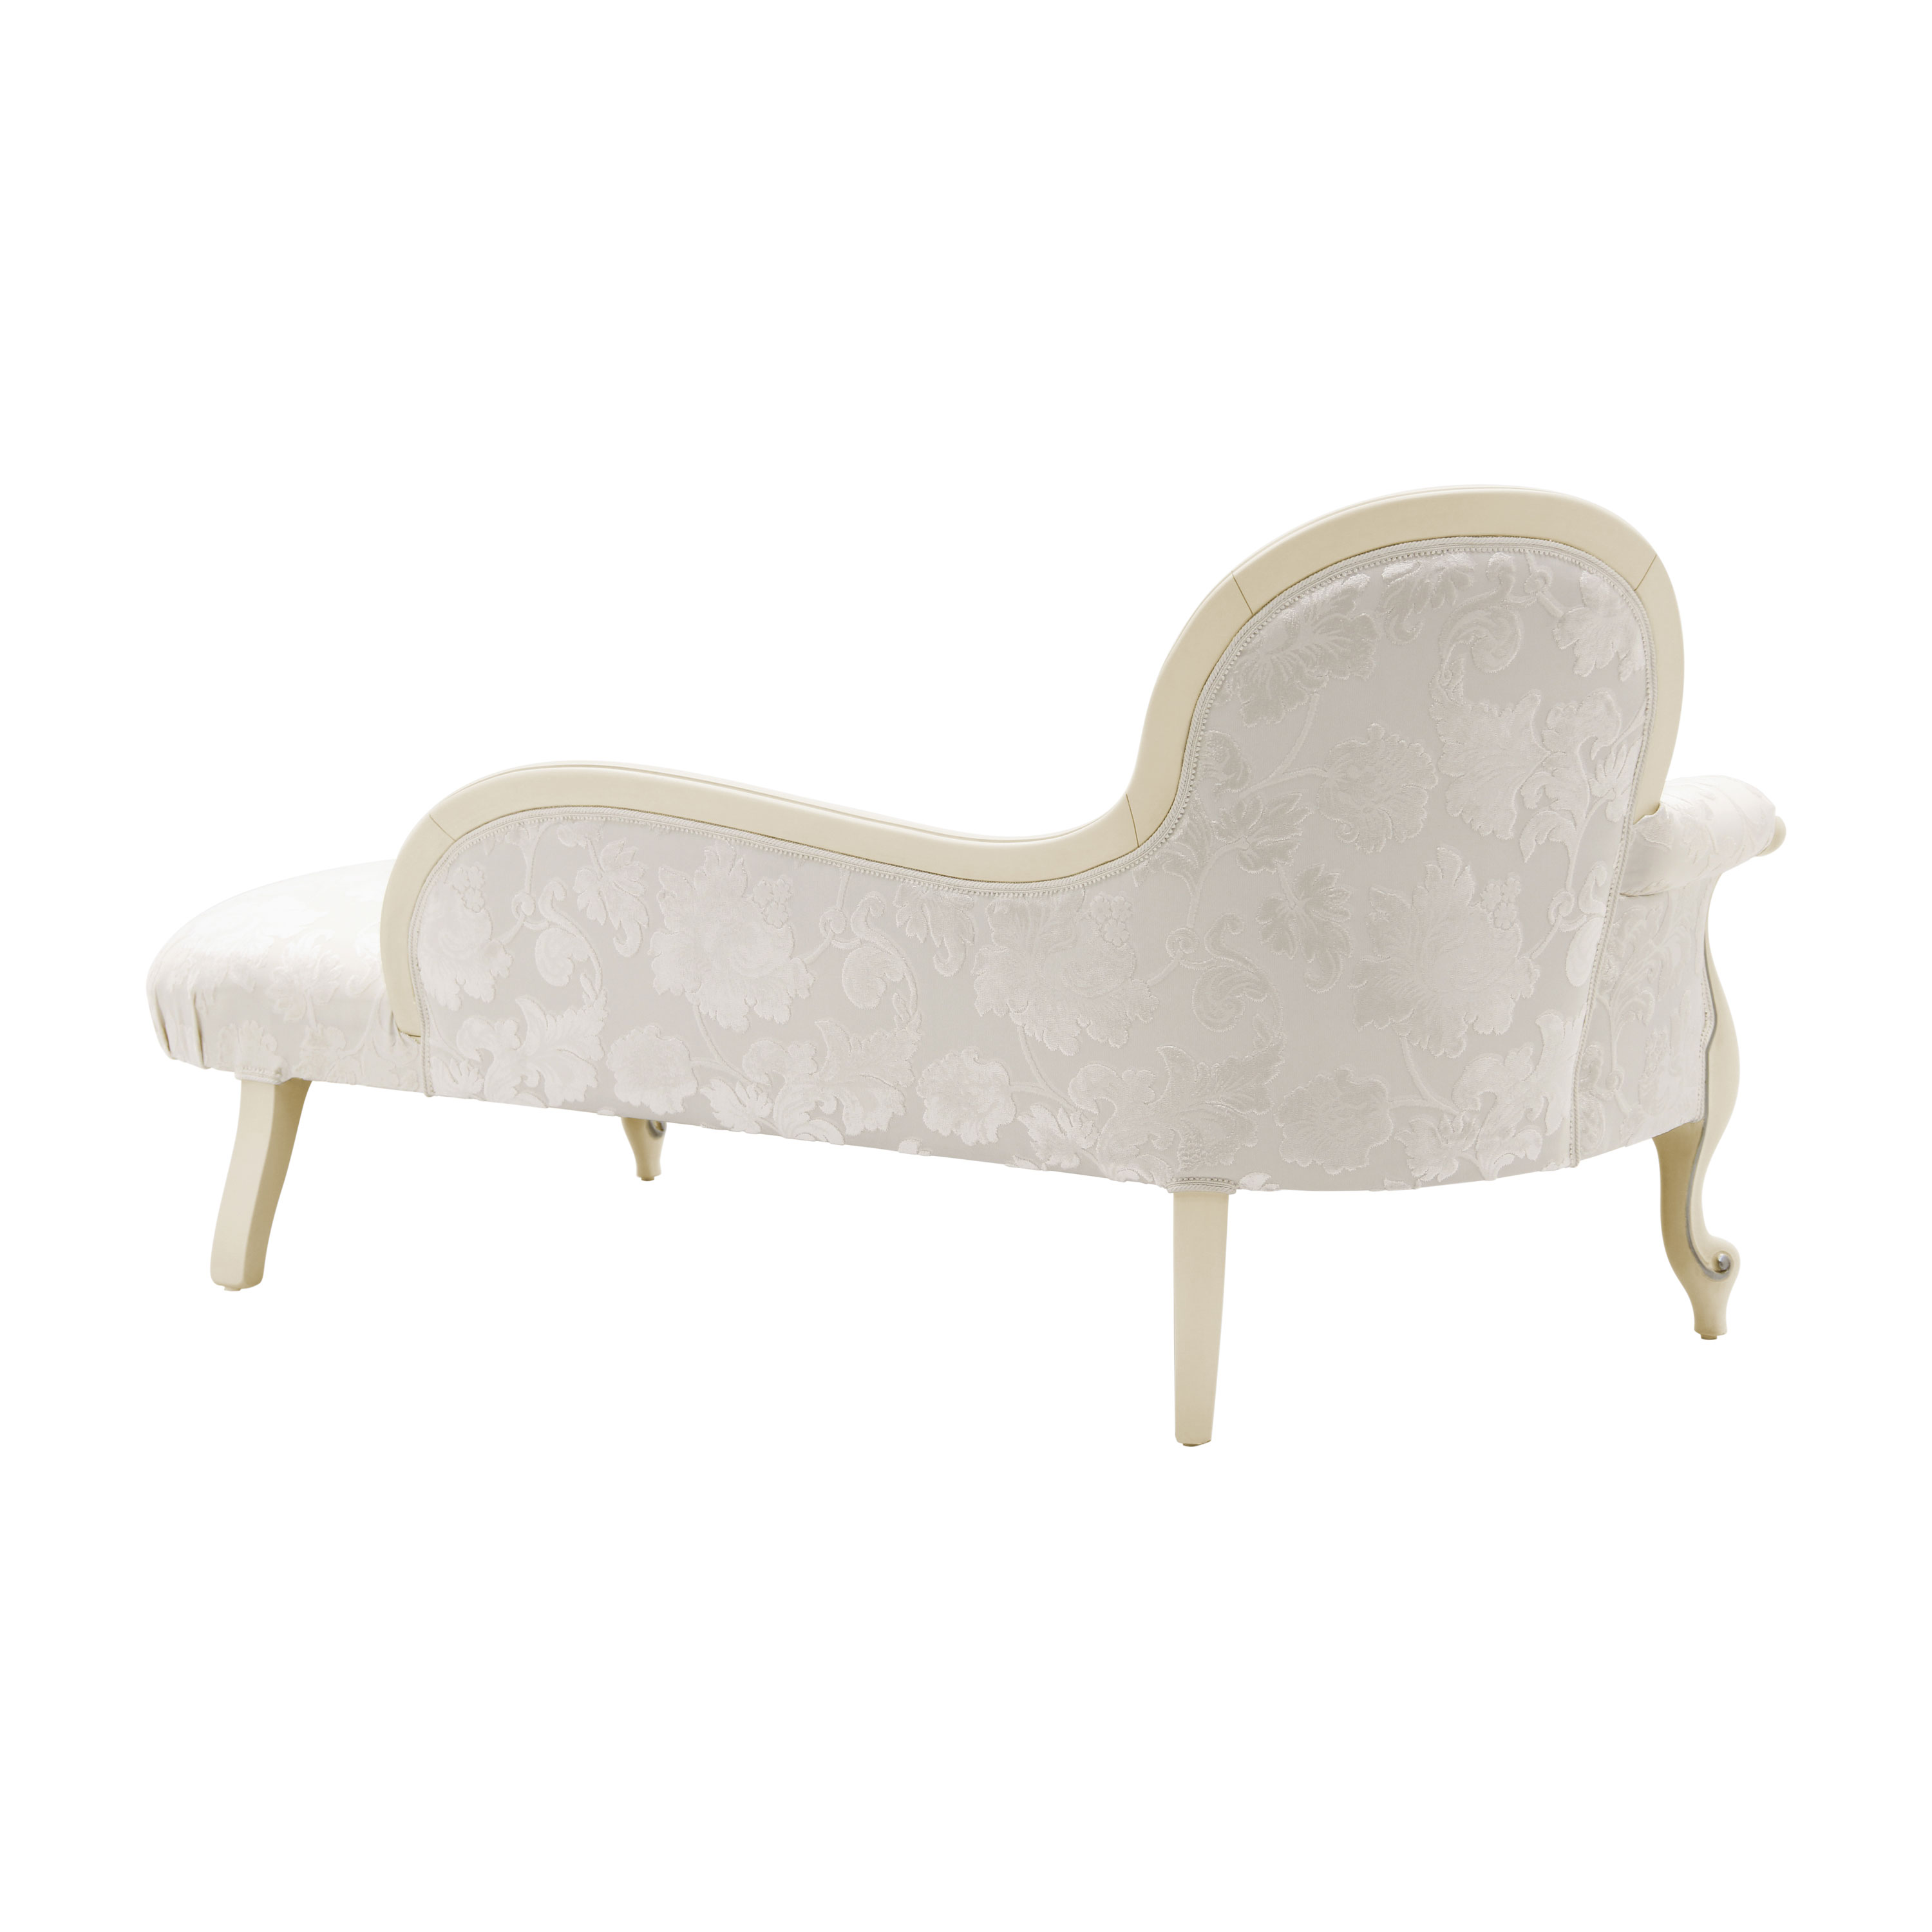 Style Chaise Longue of Wood Diva